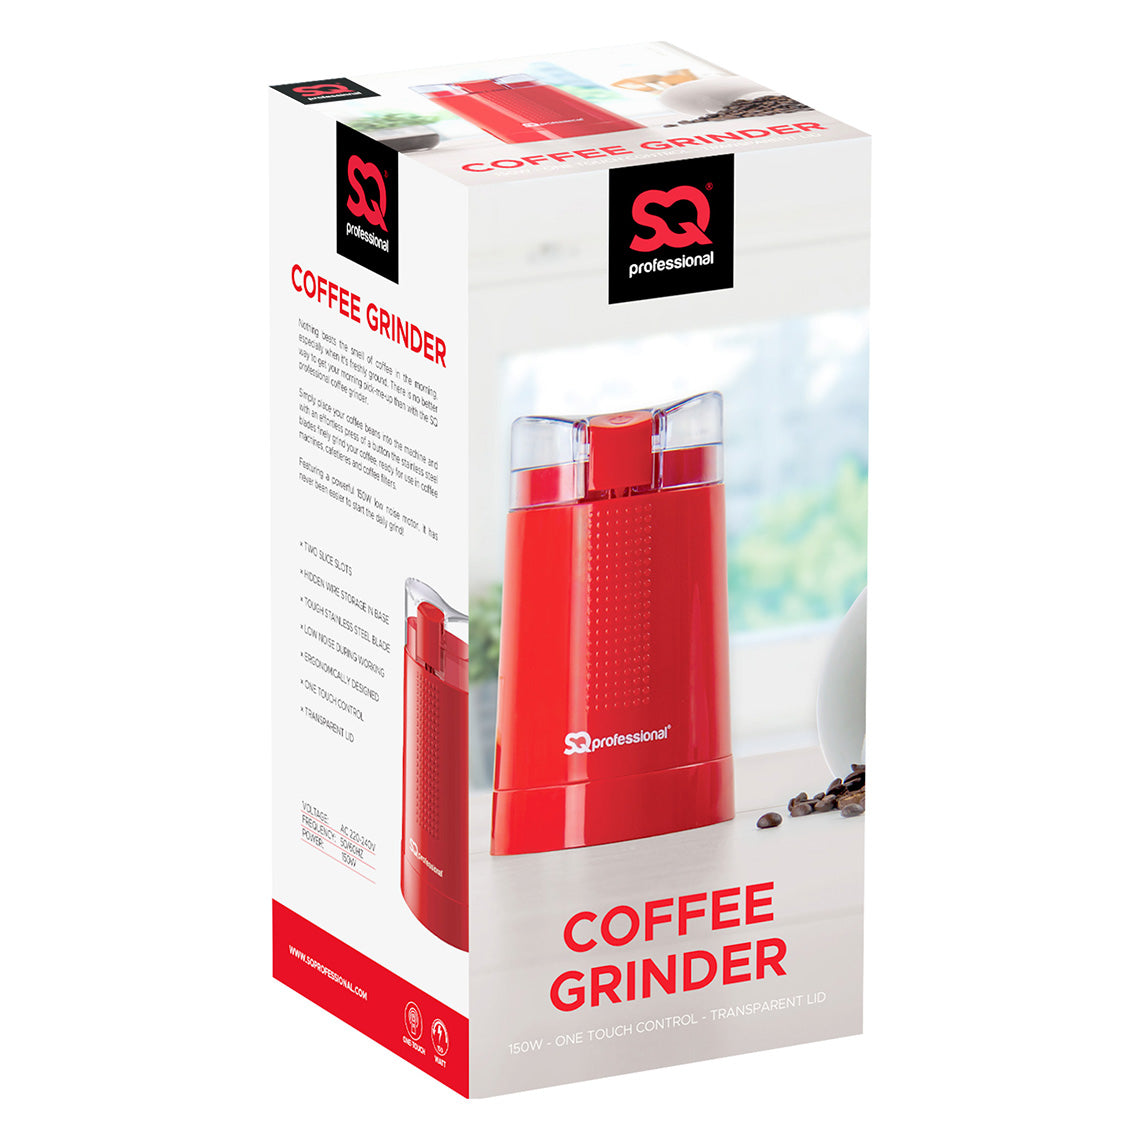 SQ Professional Blitz Coffee Grinder 150W Red 2341 (Parcel Rate)